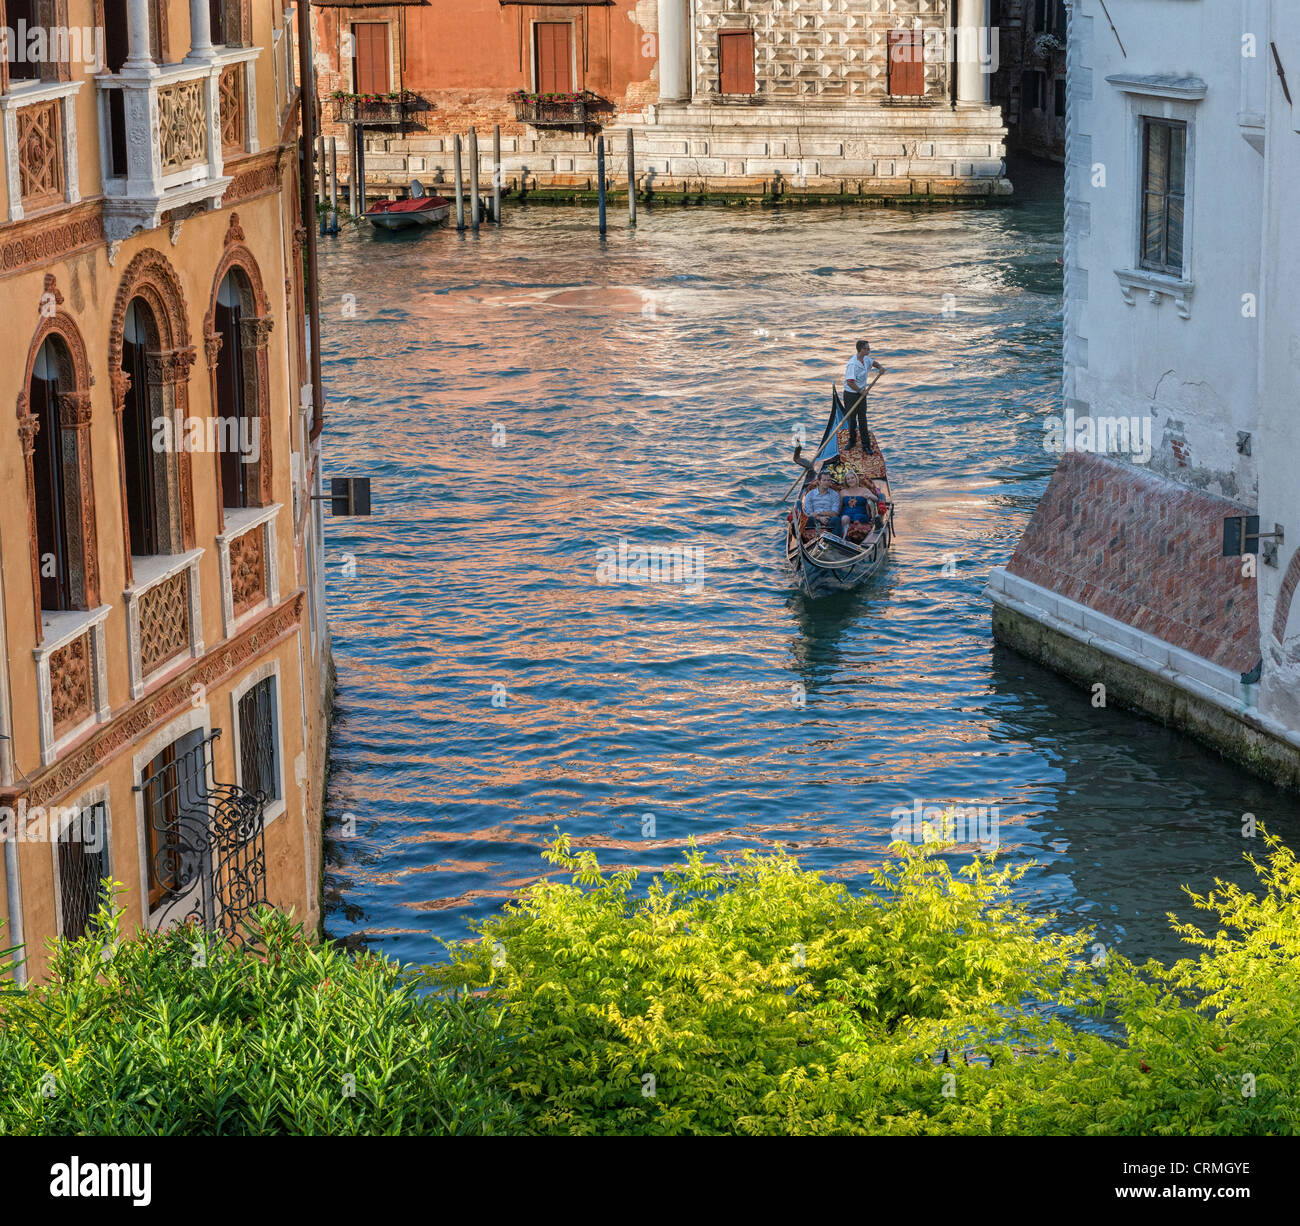 Gondola on the Grand Canal turning into a side canal in Dorsoduro Venice Stock Photo